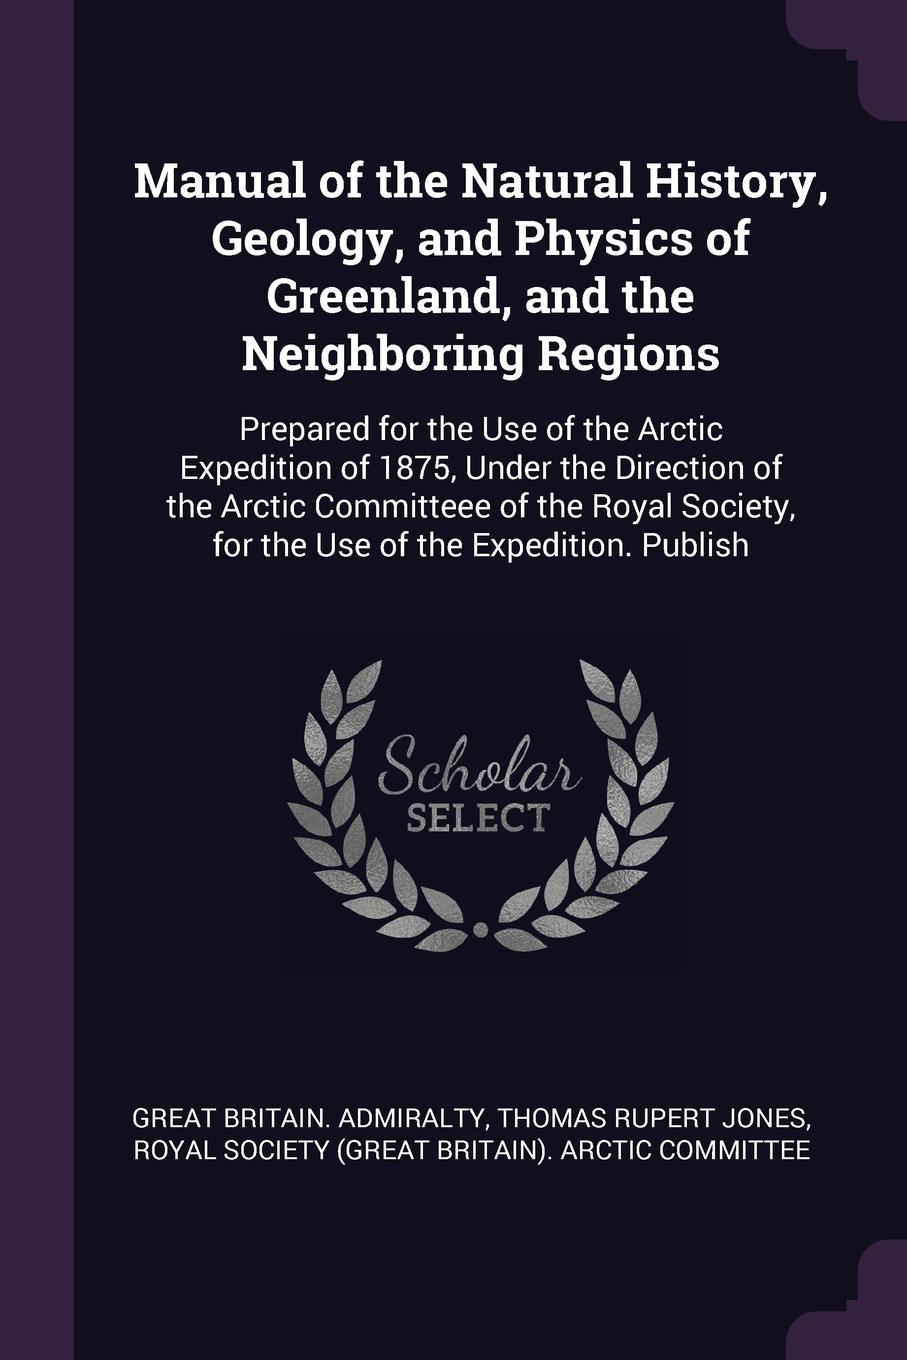 Manual of the Natural History, Geology, and Physics of Greenland, and the Neighboring Regions. Prepared for the Use of the Arctic Expedition of 1875, Under the Direction of the Arctic Committeee of the Royal Society, for the Use of the Expedition....